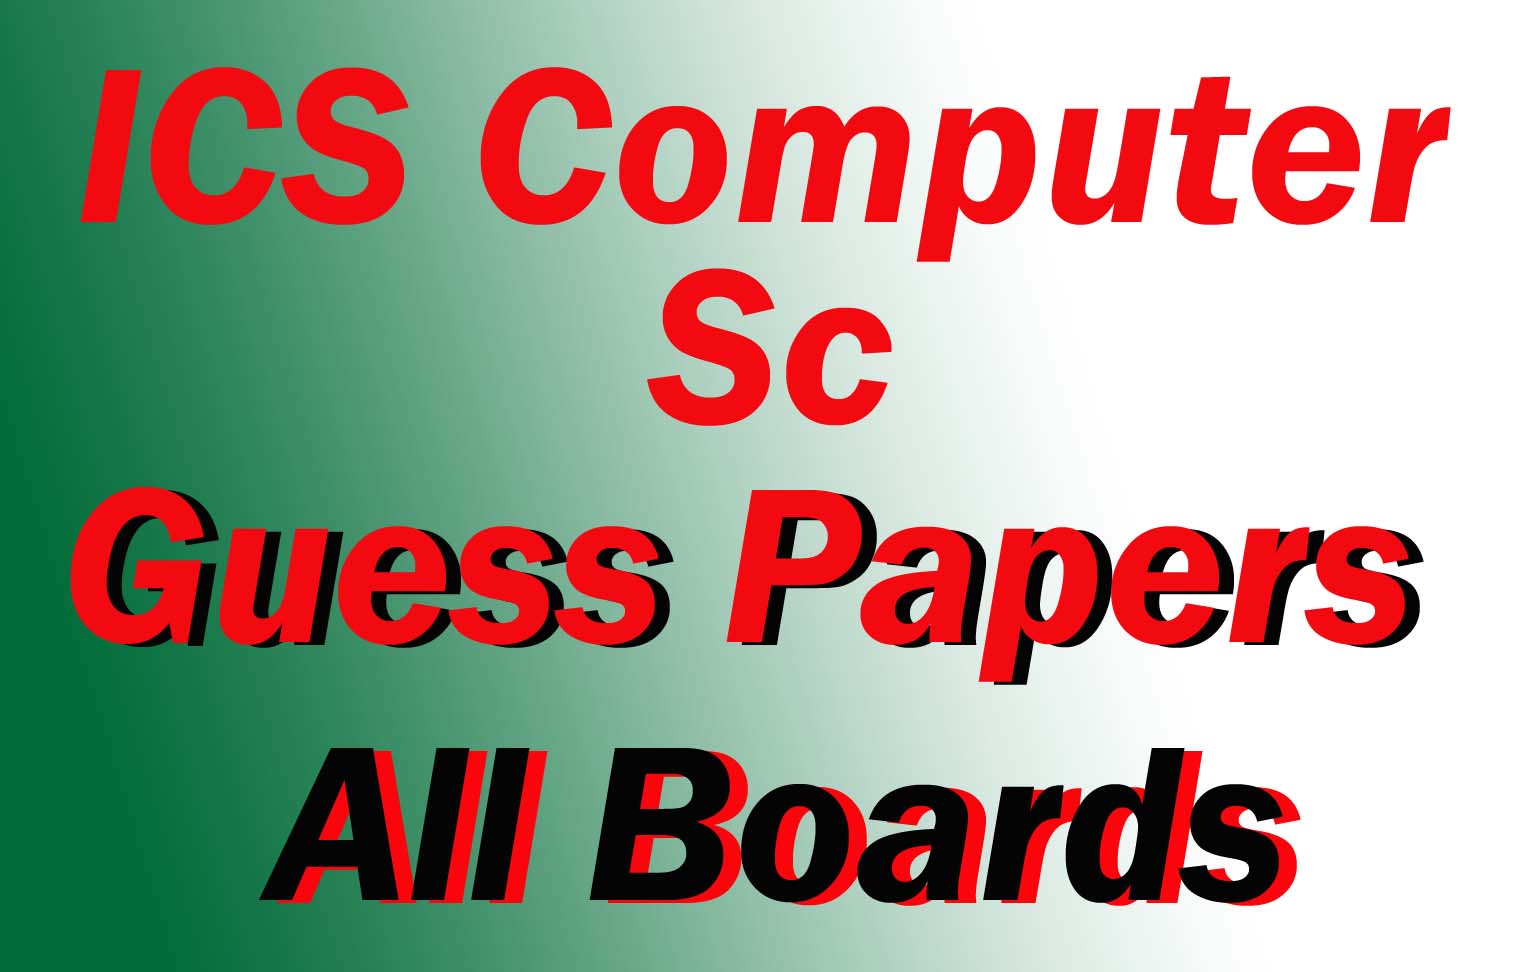 ICS guess papers part 2